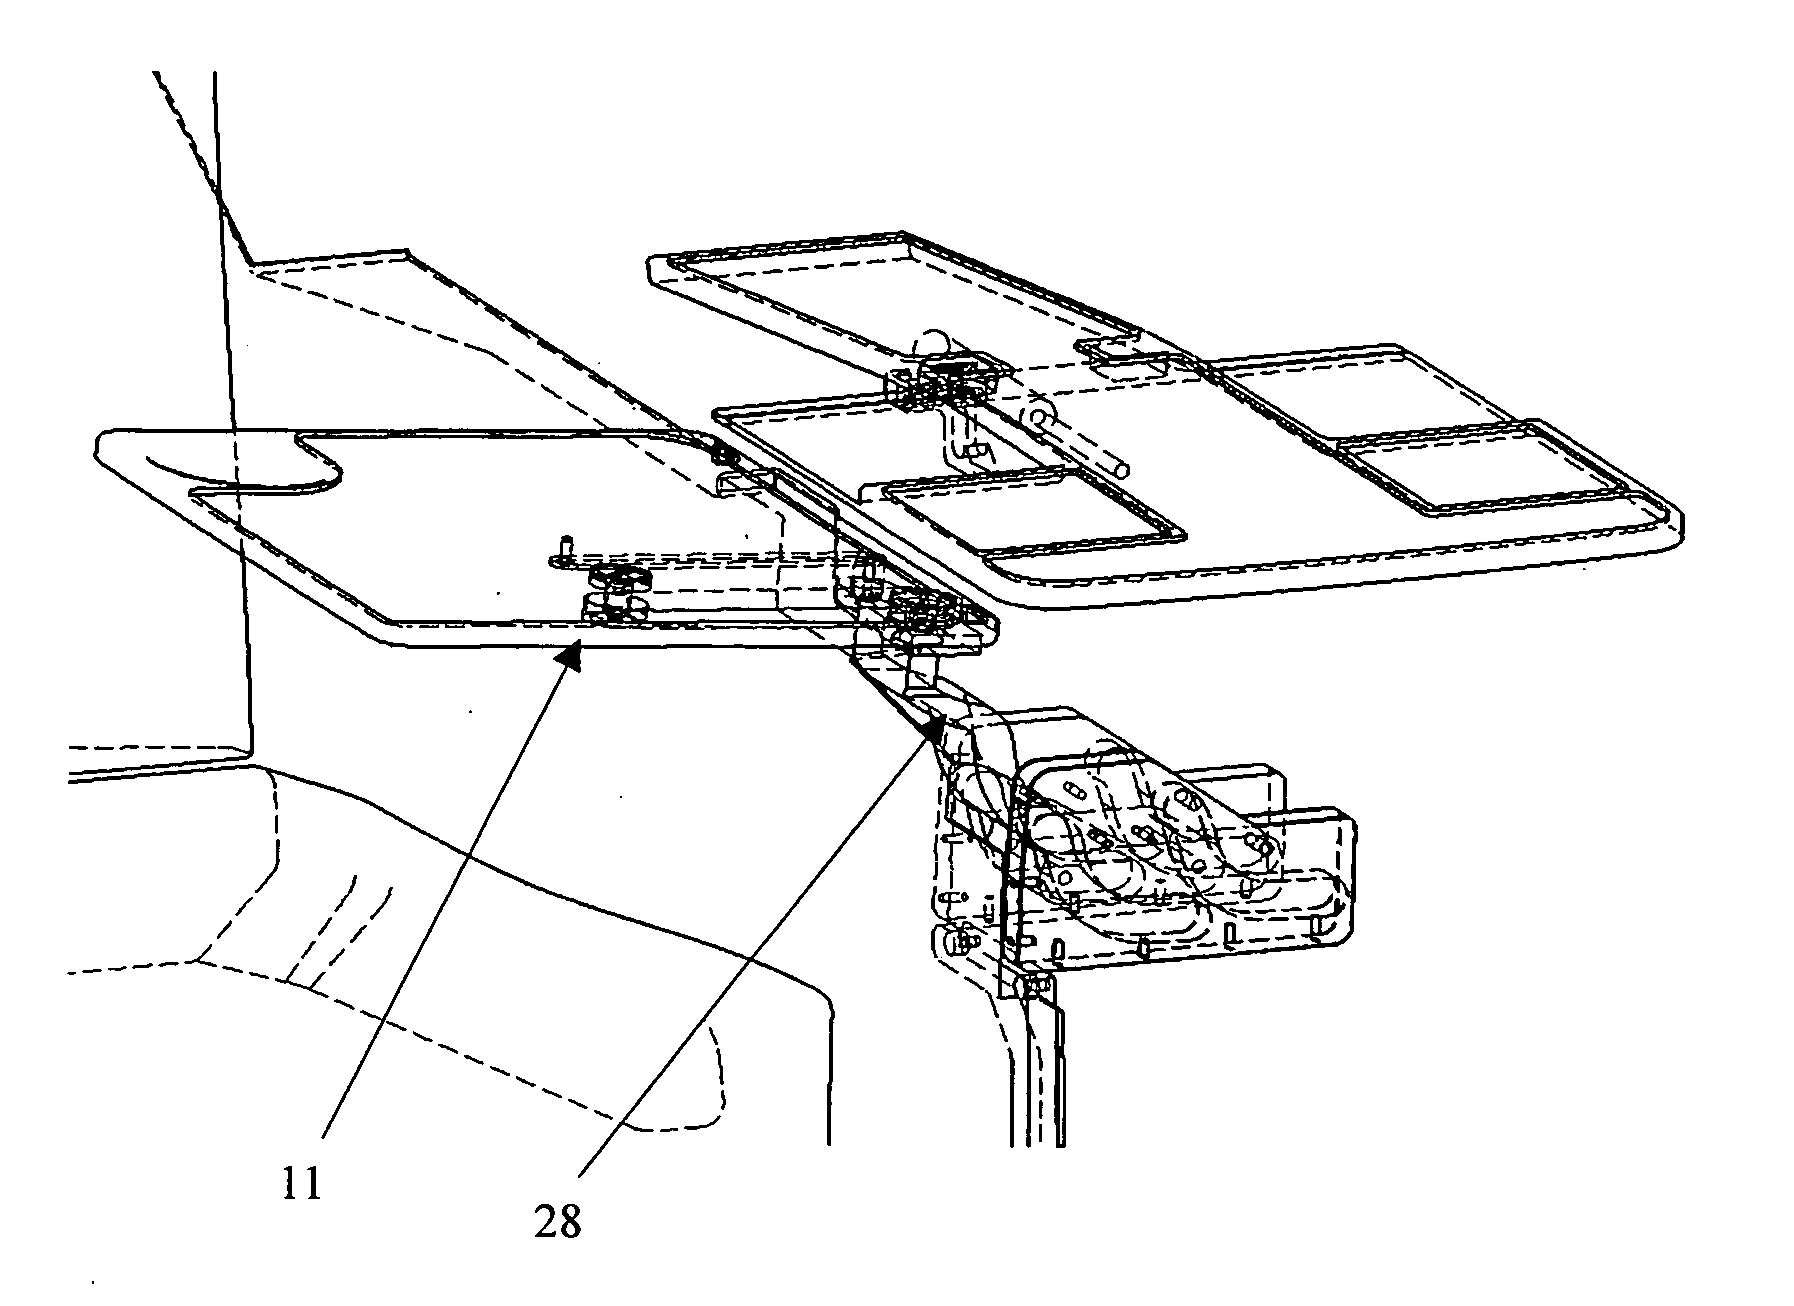 Table apparatus for a vehicle seat